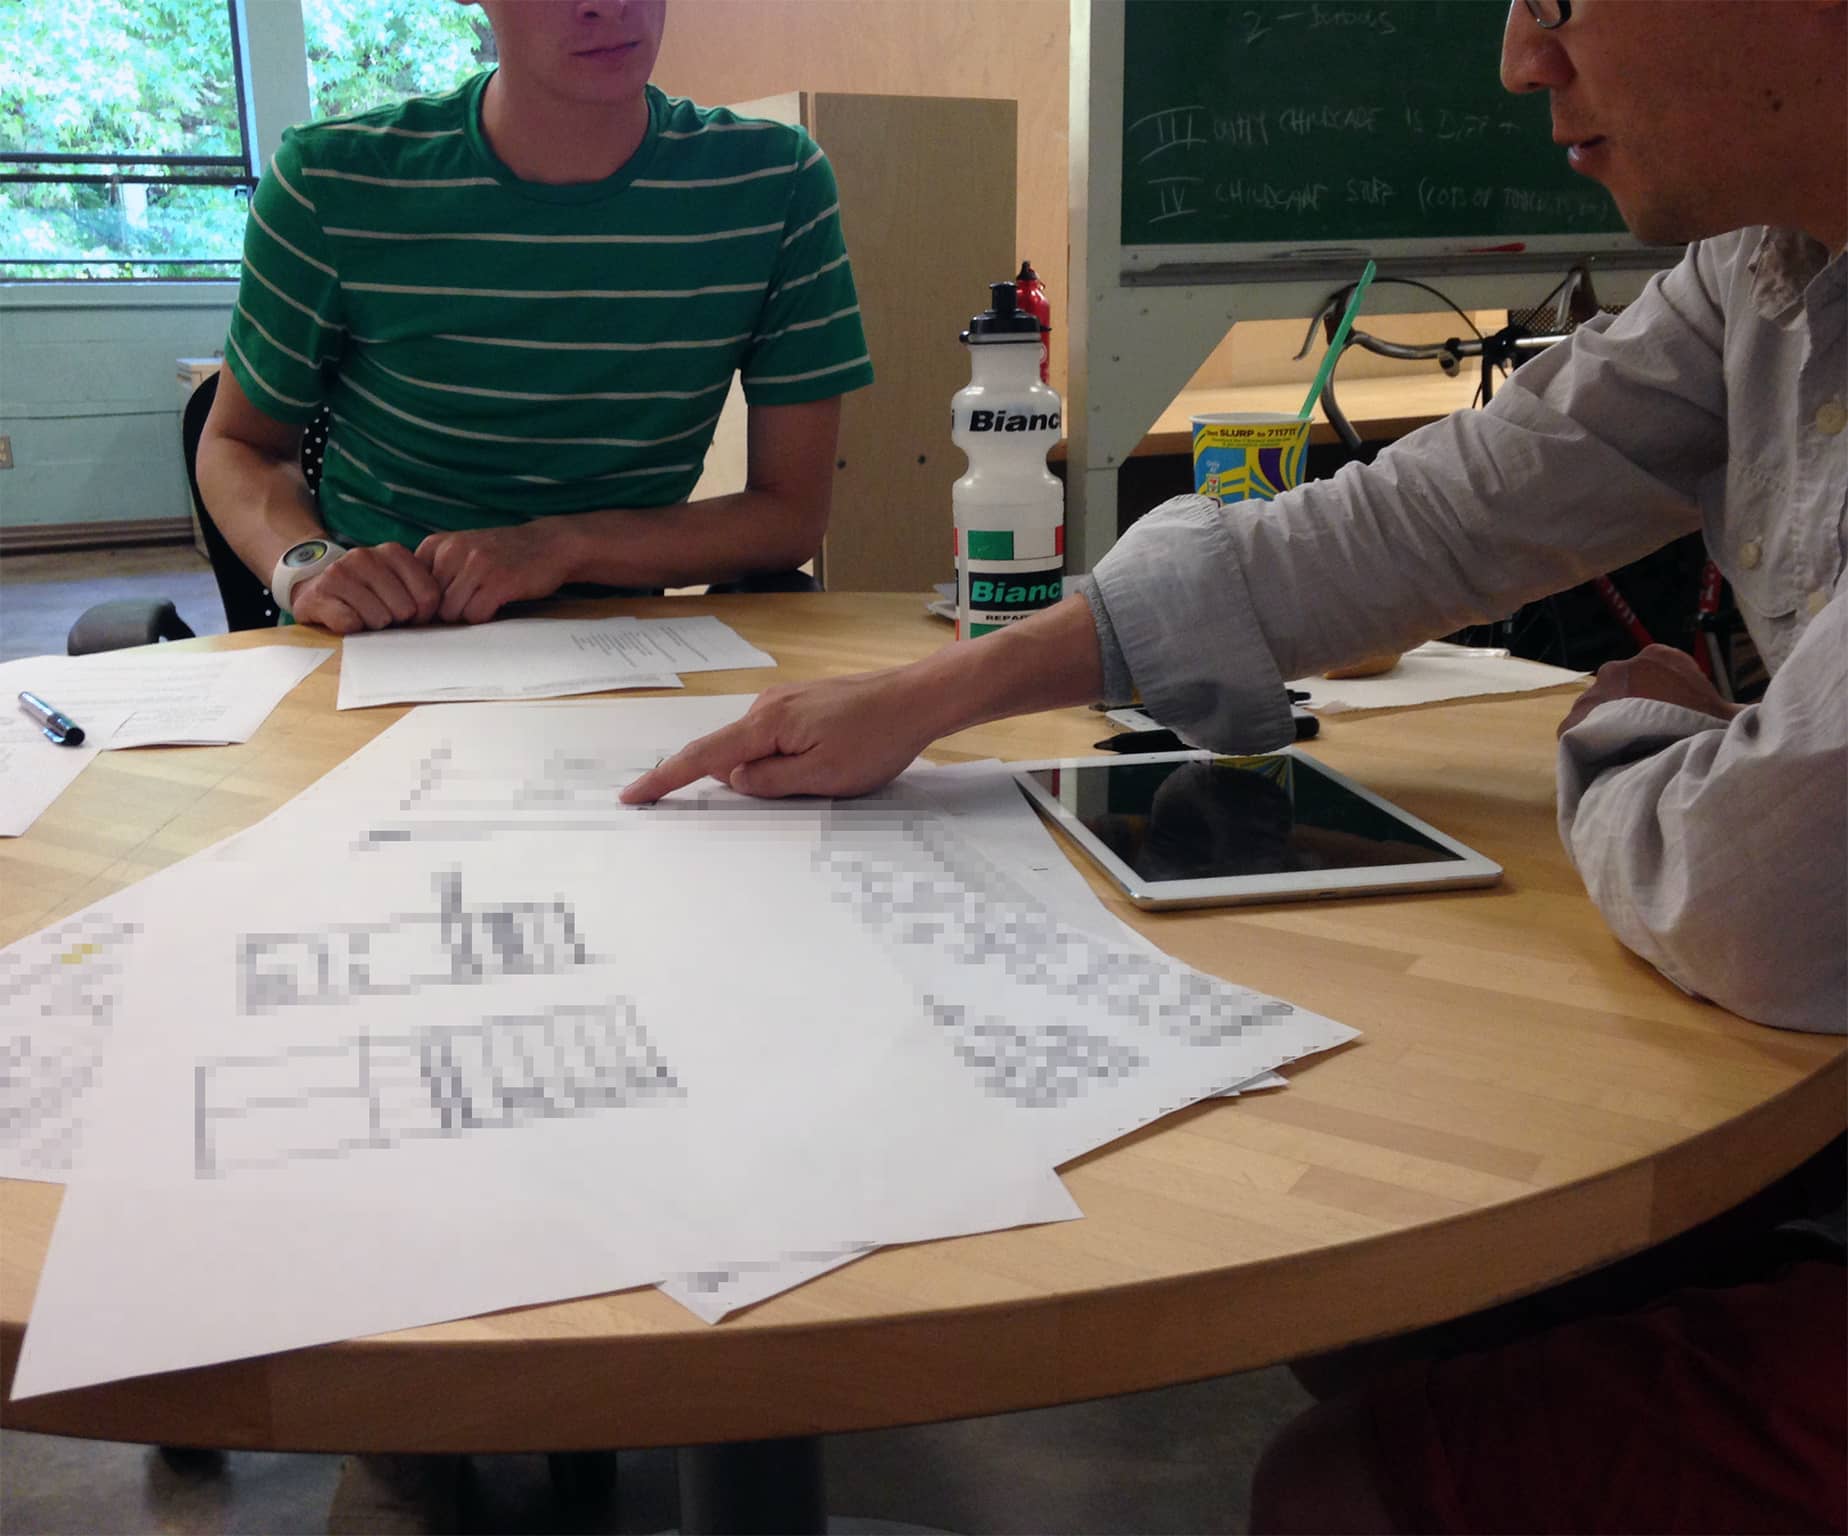 Designer at a table pointing out a detail in a sketch to another designer sitting at the table